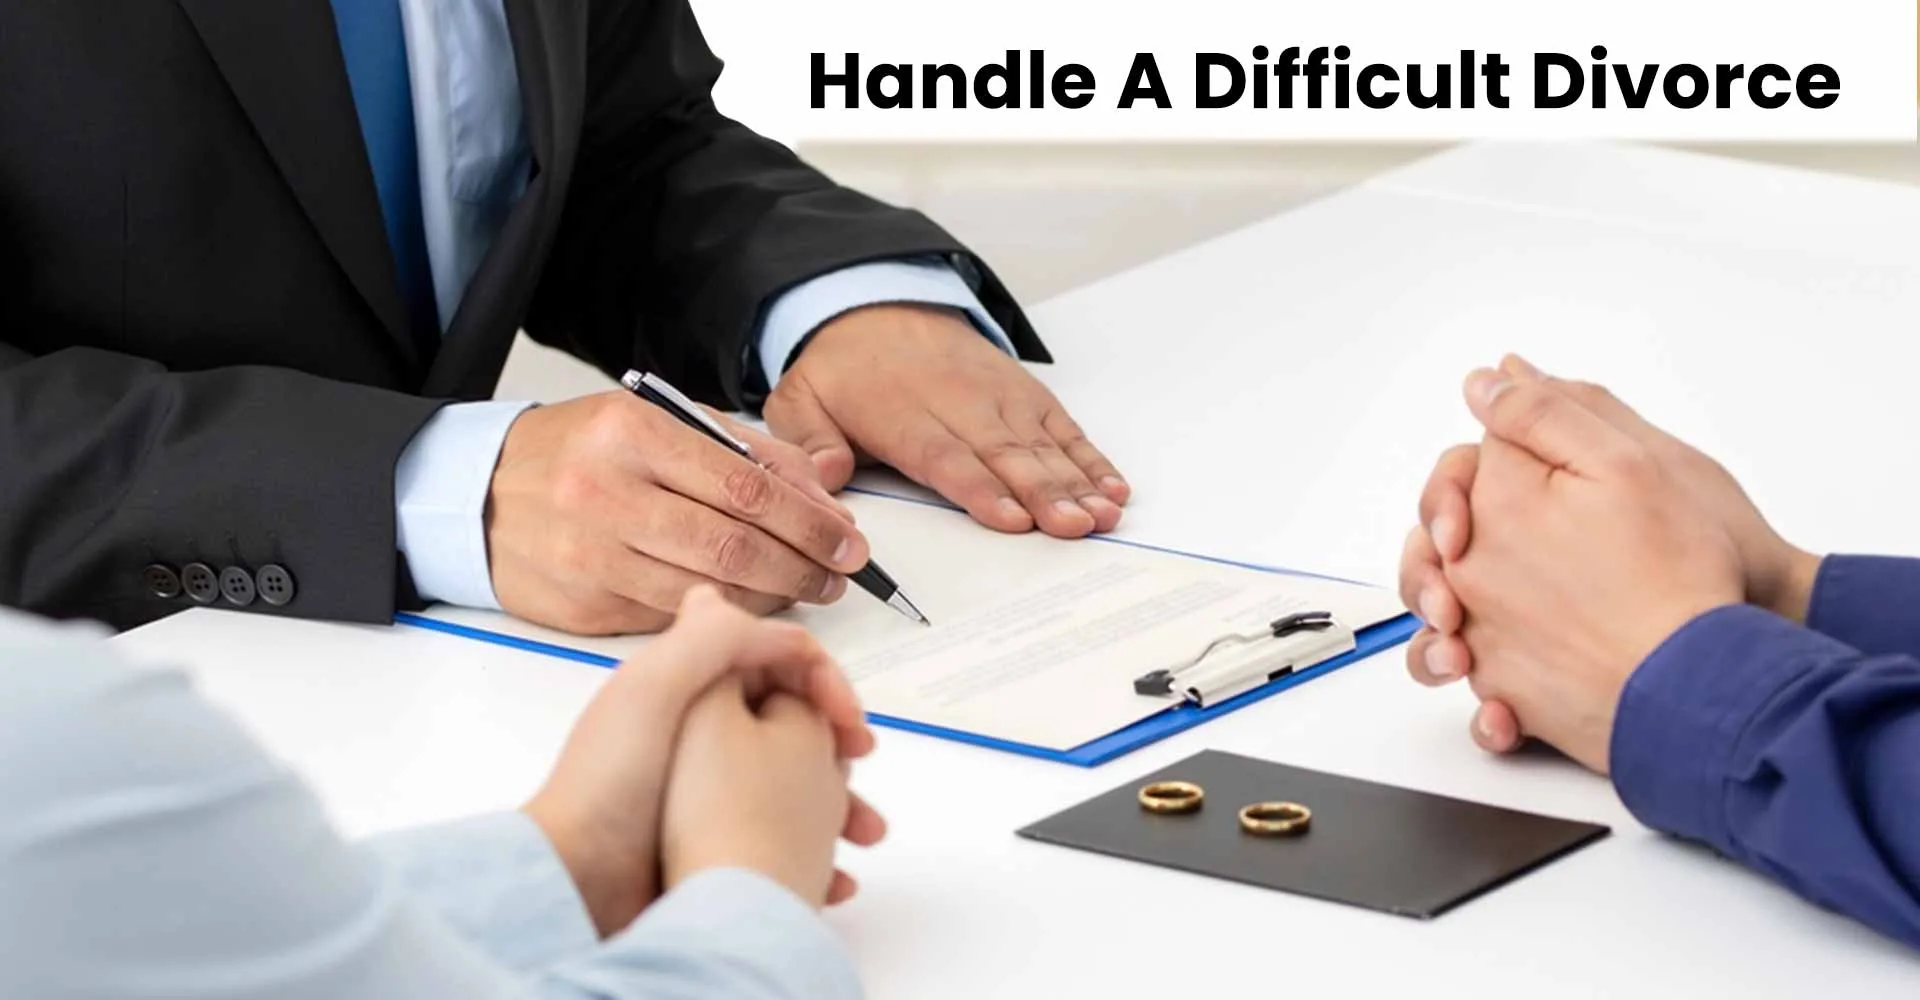 Tips To Handle A Difficult Divorce